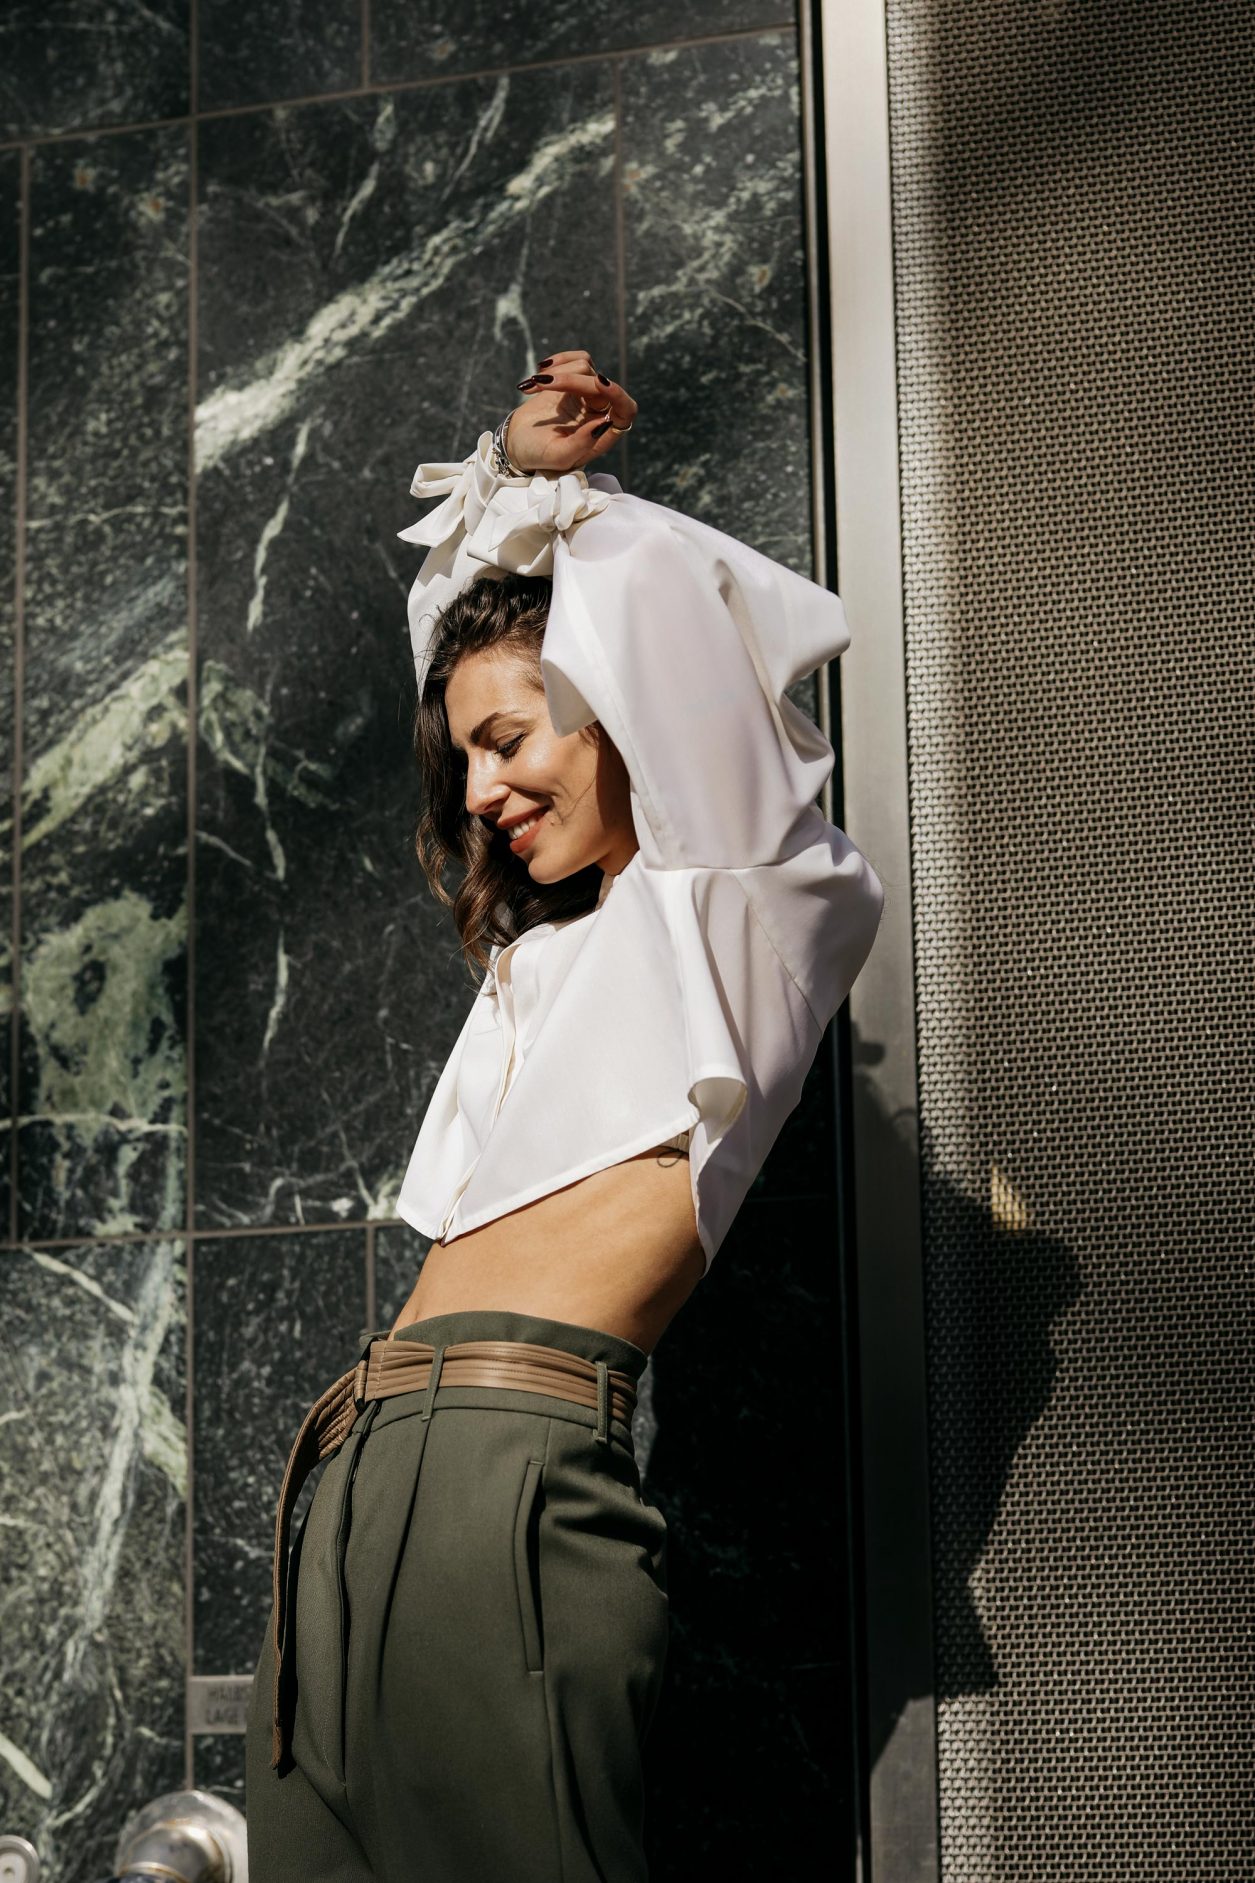 Anzeige | Streetstyle by Masha Sedgwick, photos: Jeremy Moeller | Spring summer fashion trends, everyday outfit inspiration, military chick city look: wearing khaki boyfriend pants by Munthe, white cropped Nobi Talai blouse